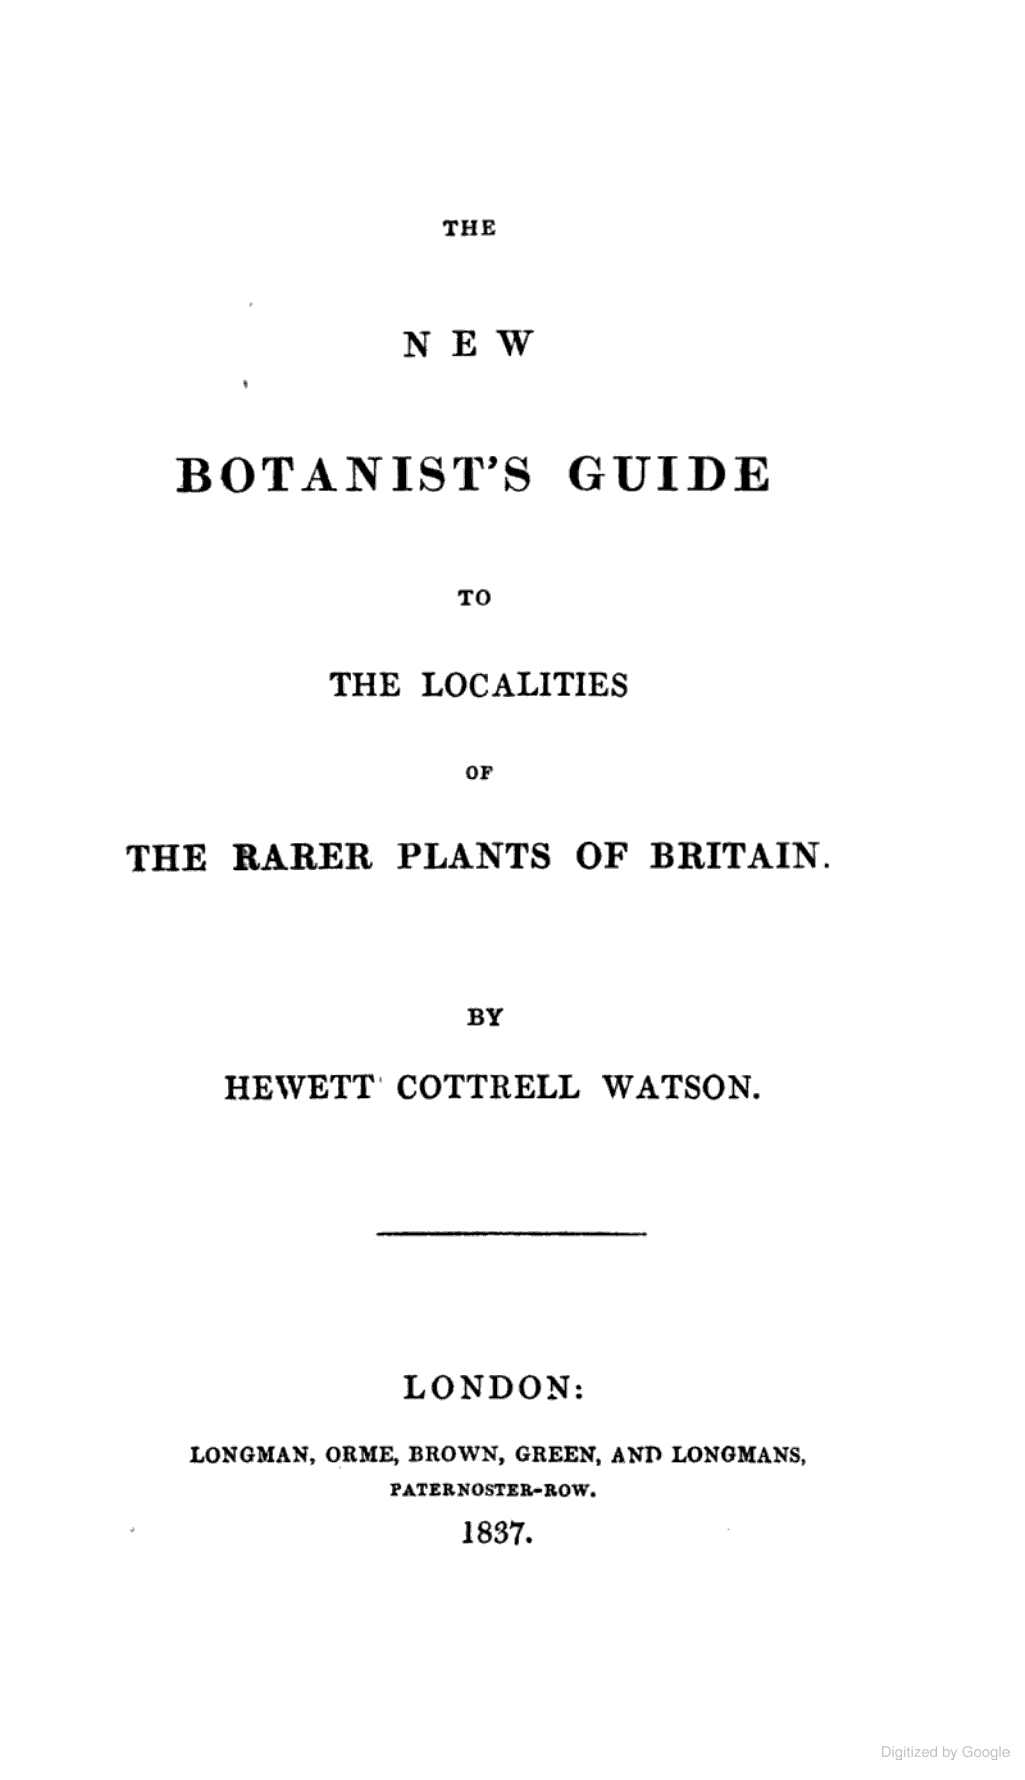 The new botanist’s guide to the localities of the rarer plants of Britain cover